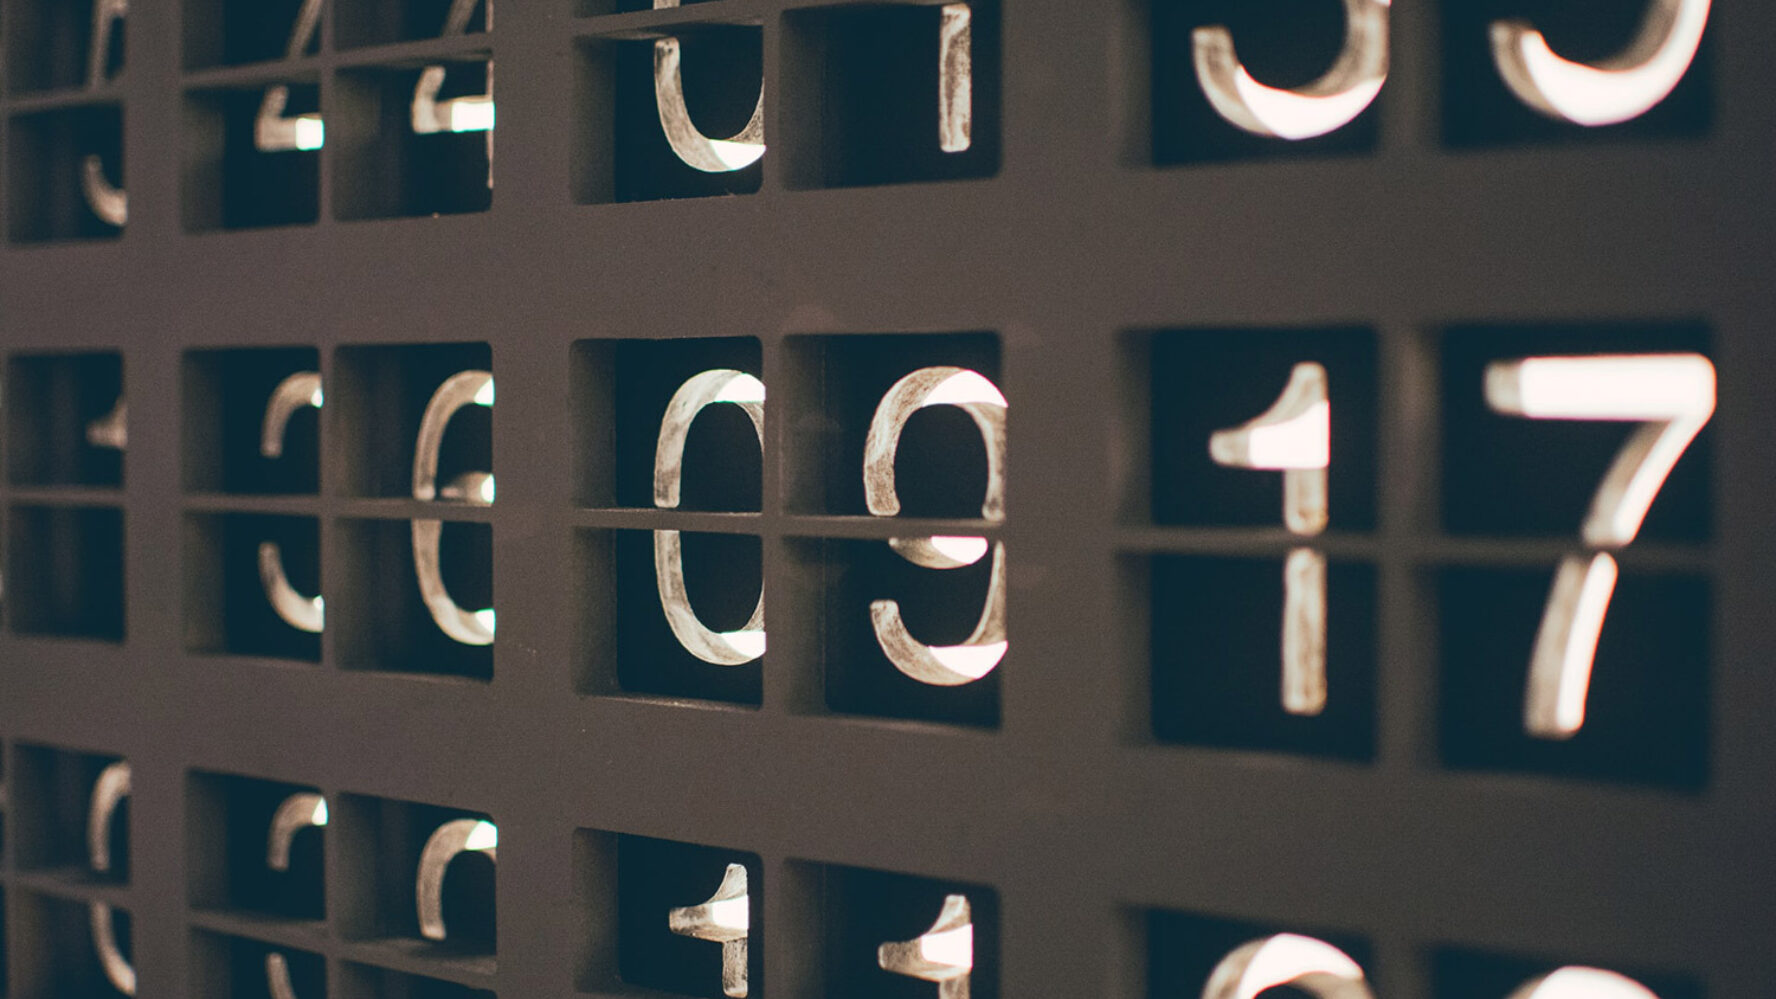 Blocks of numbers on a board